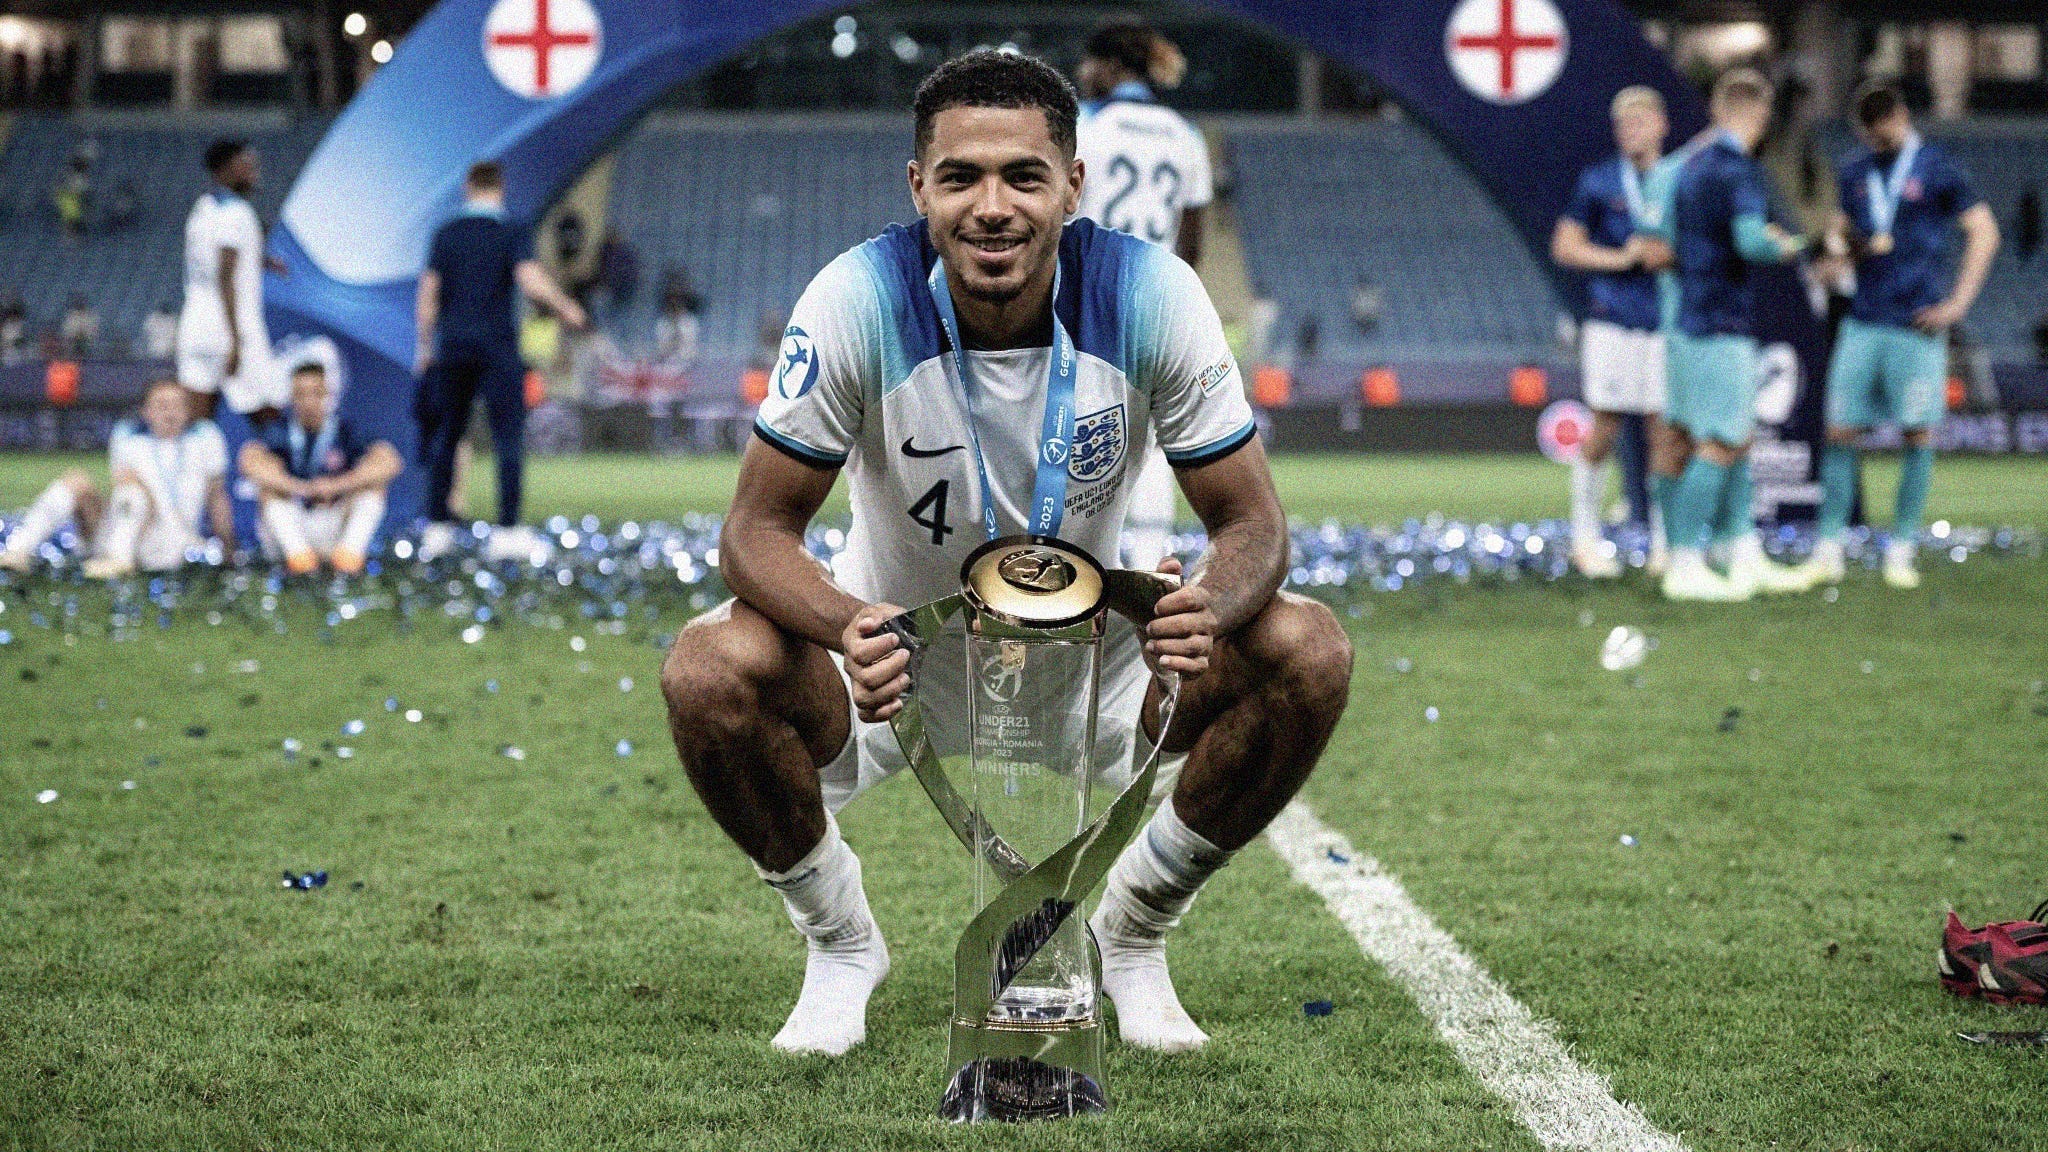 A photo of England's Levi Colwill crouching down, holding the UEFA U-21 EURO by either side, smiling at the camera